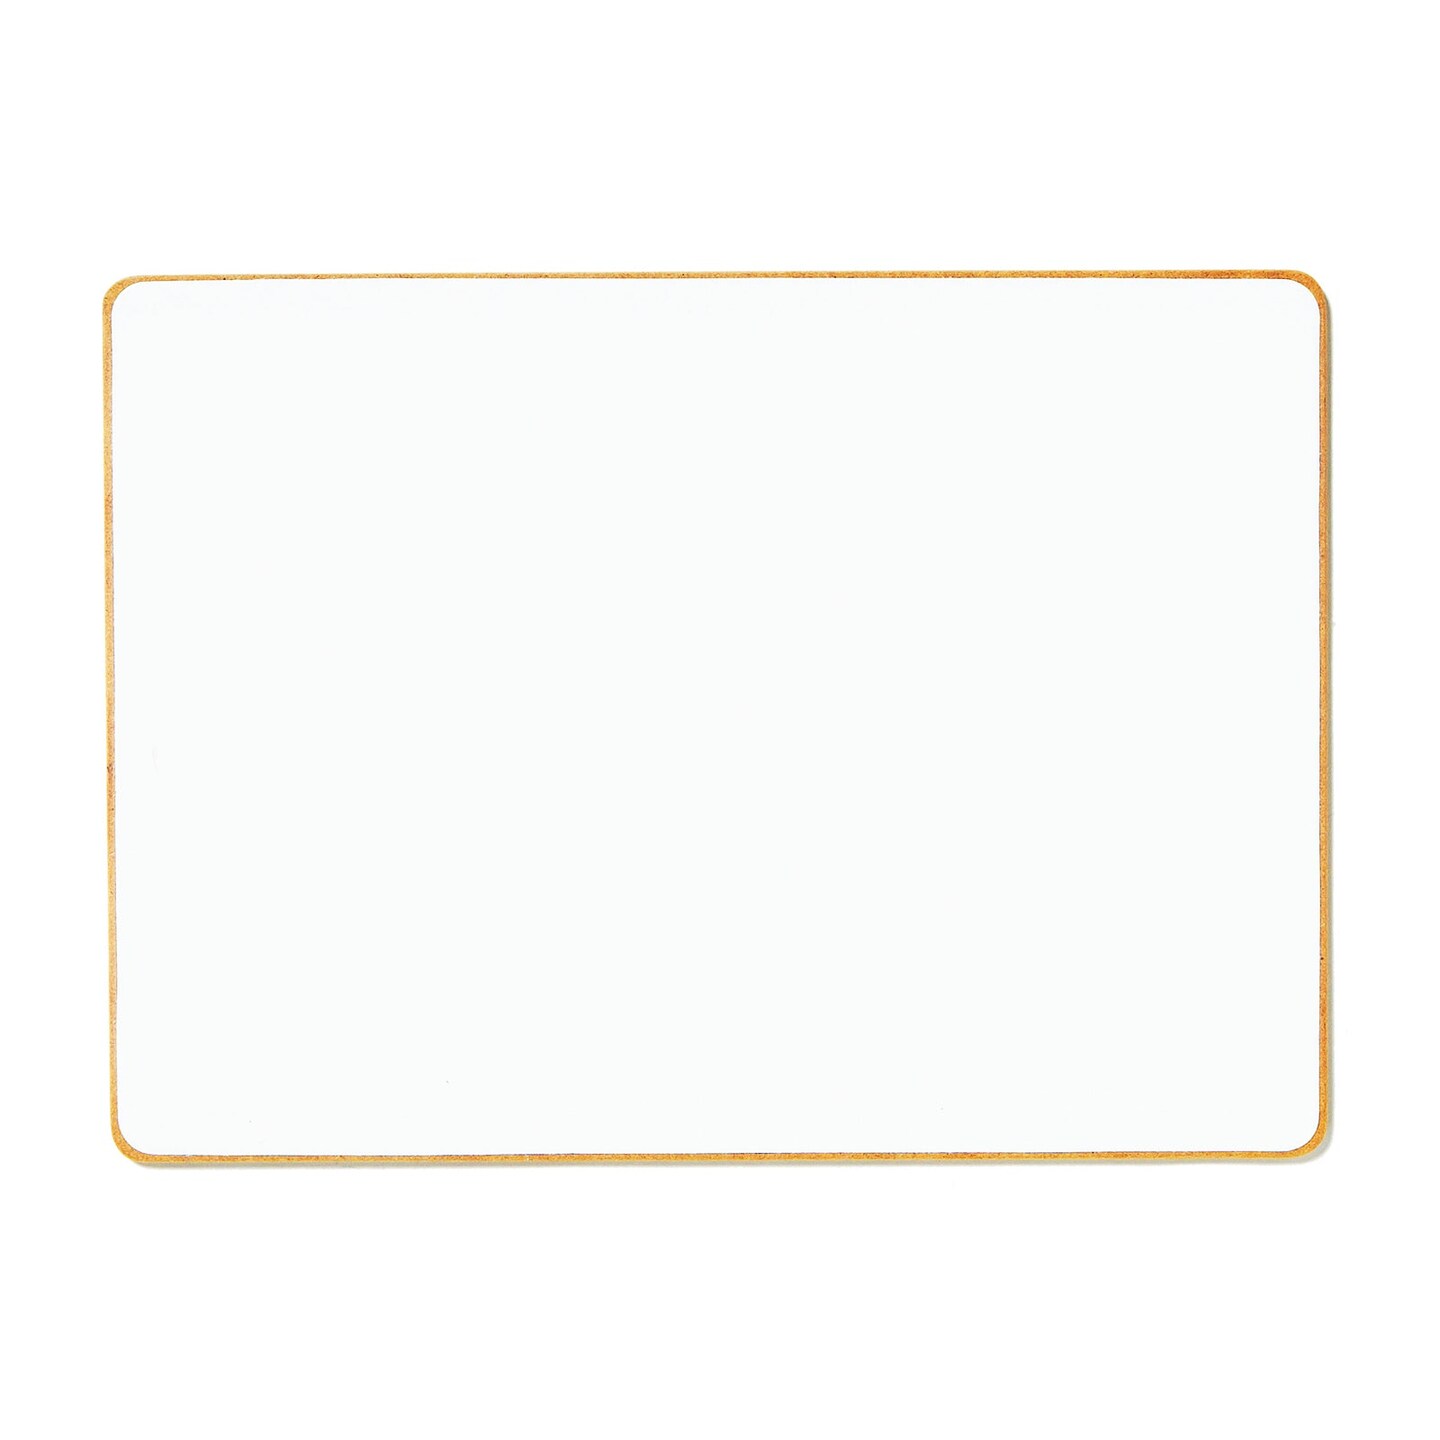 Magnetic Dry Erase Boards, Double-Sided Blank/Blank, Set of 5